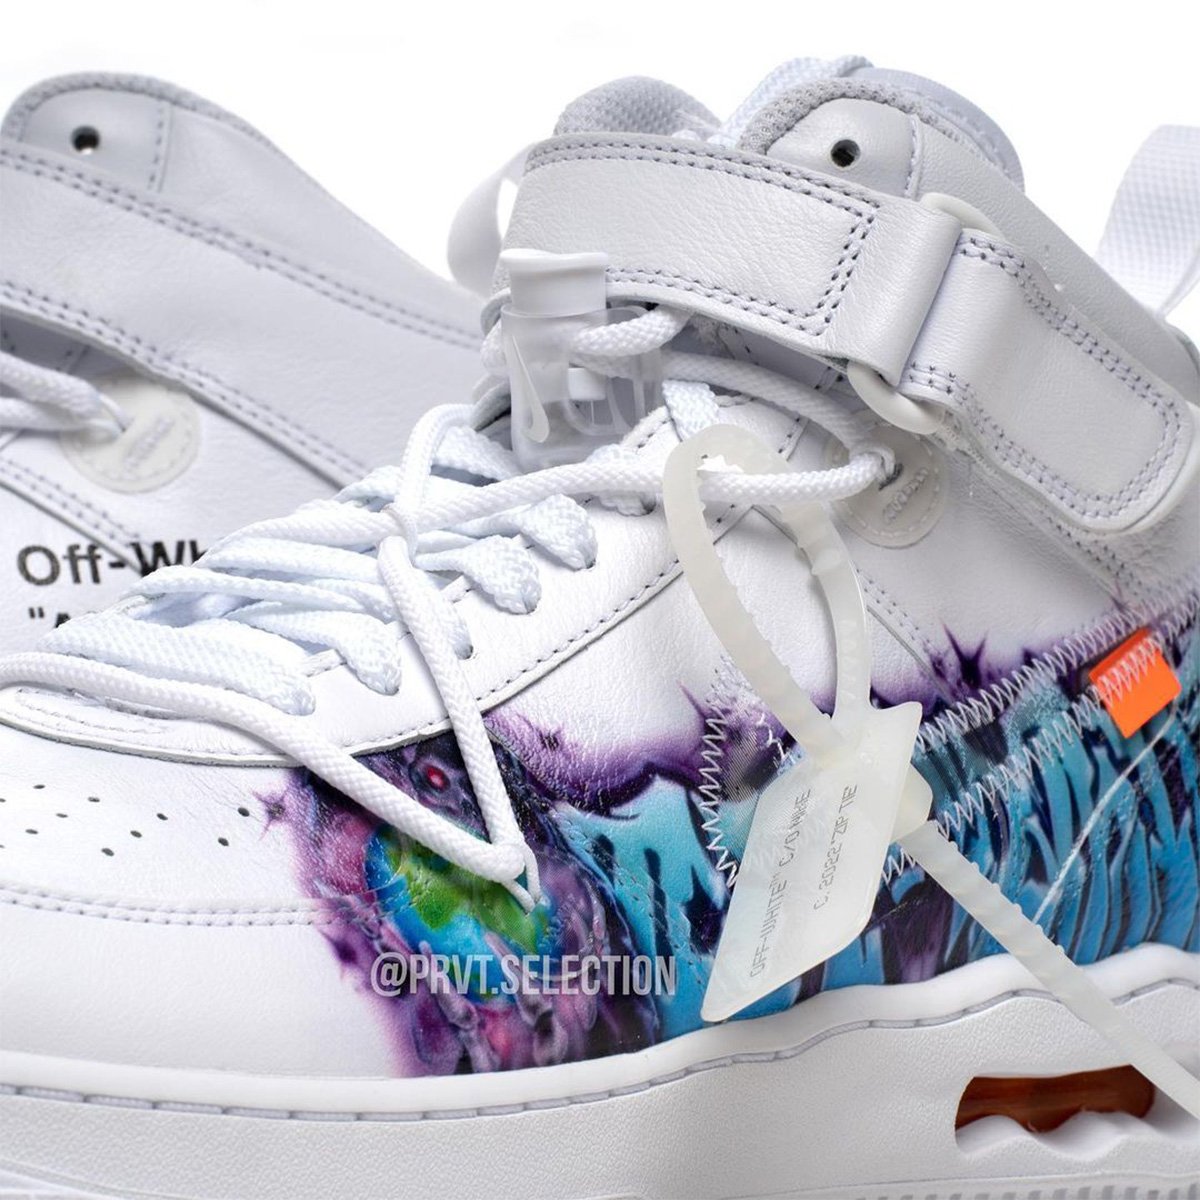 Off-White Nike Air Force 1 Mid Graffiti Release Date Info